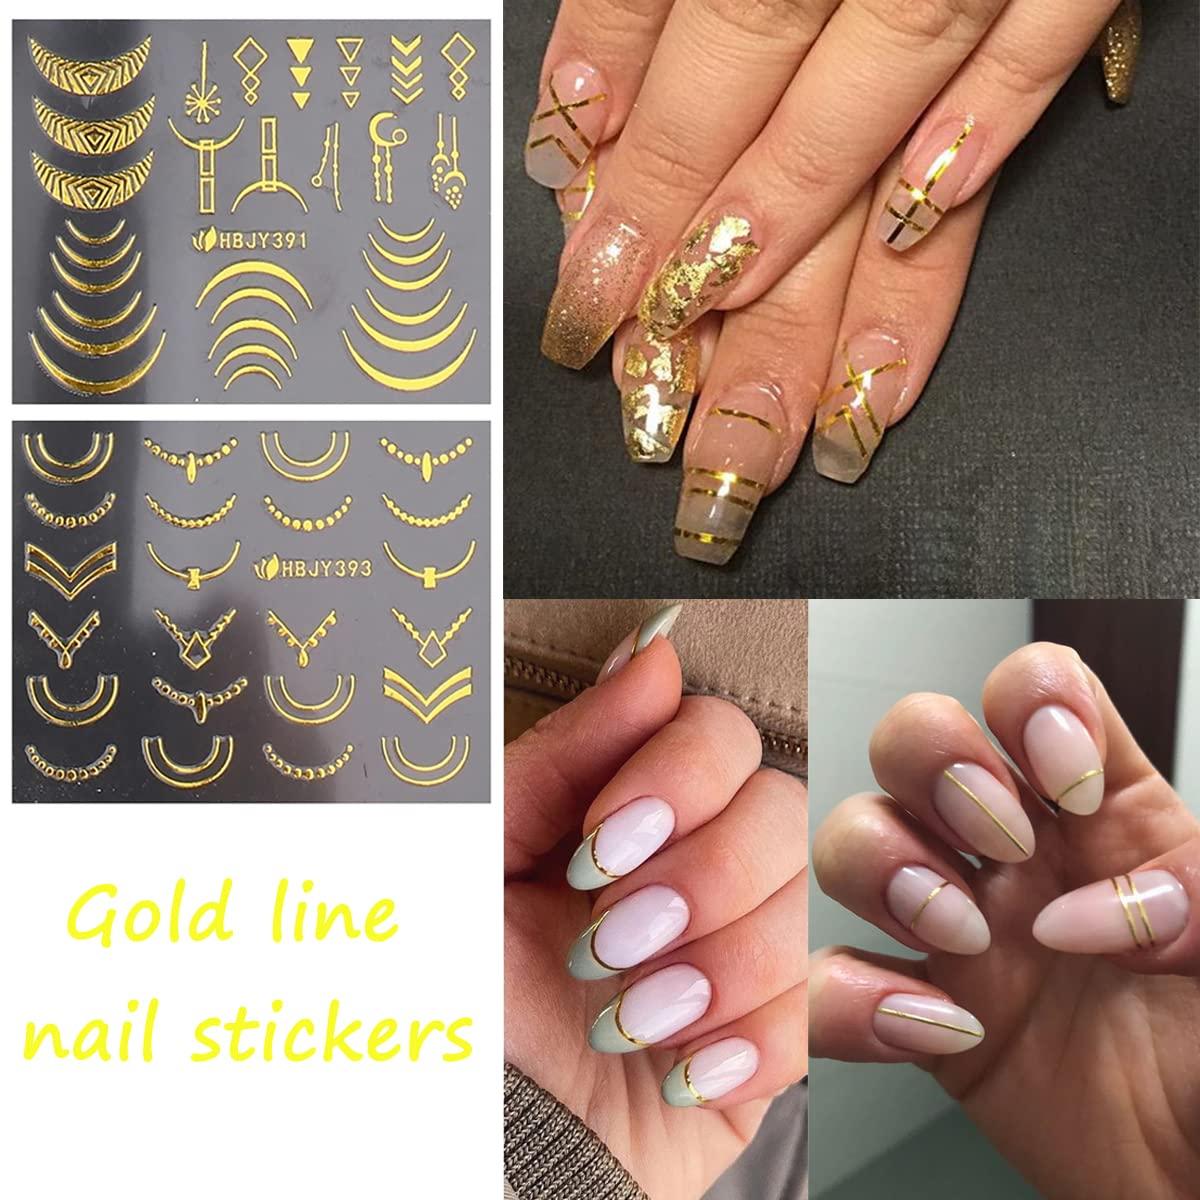 Gold Flowers Nail Art Stickers Decals 3D Metallic Leaves Nail Decals Gold  Line Self Adhesive Nail Art Supplies Golden Flower Leaf Lace Line Design  Nail Stickers for Women Manicure Tip 12 Small